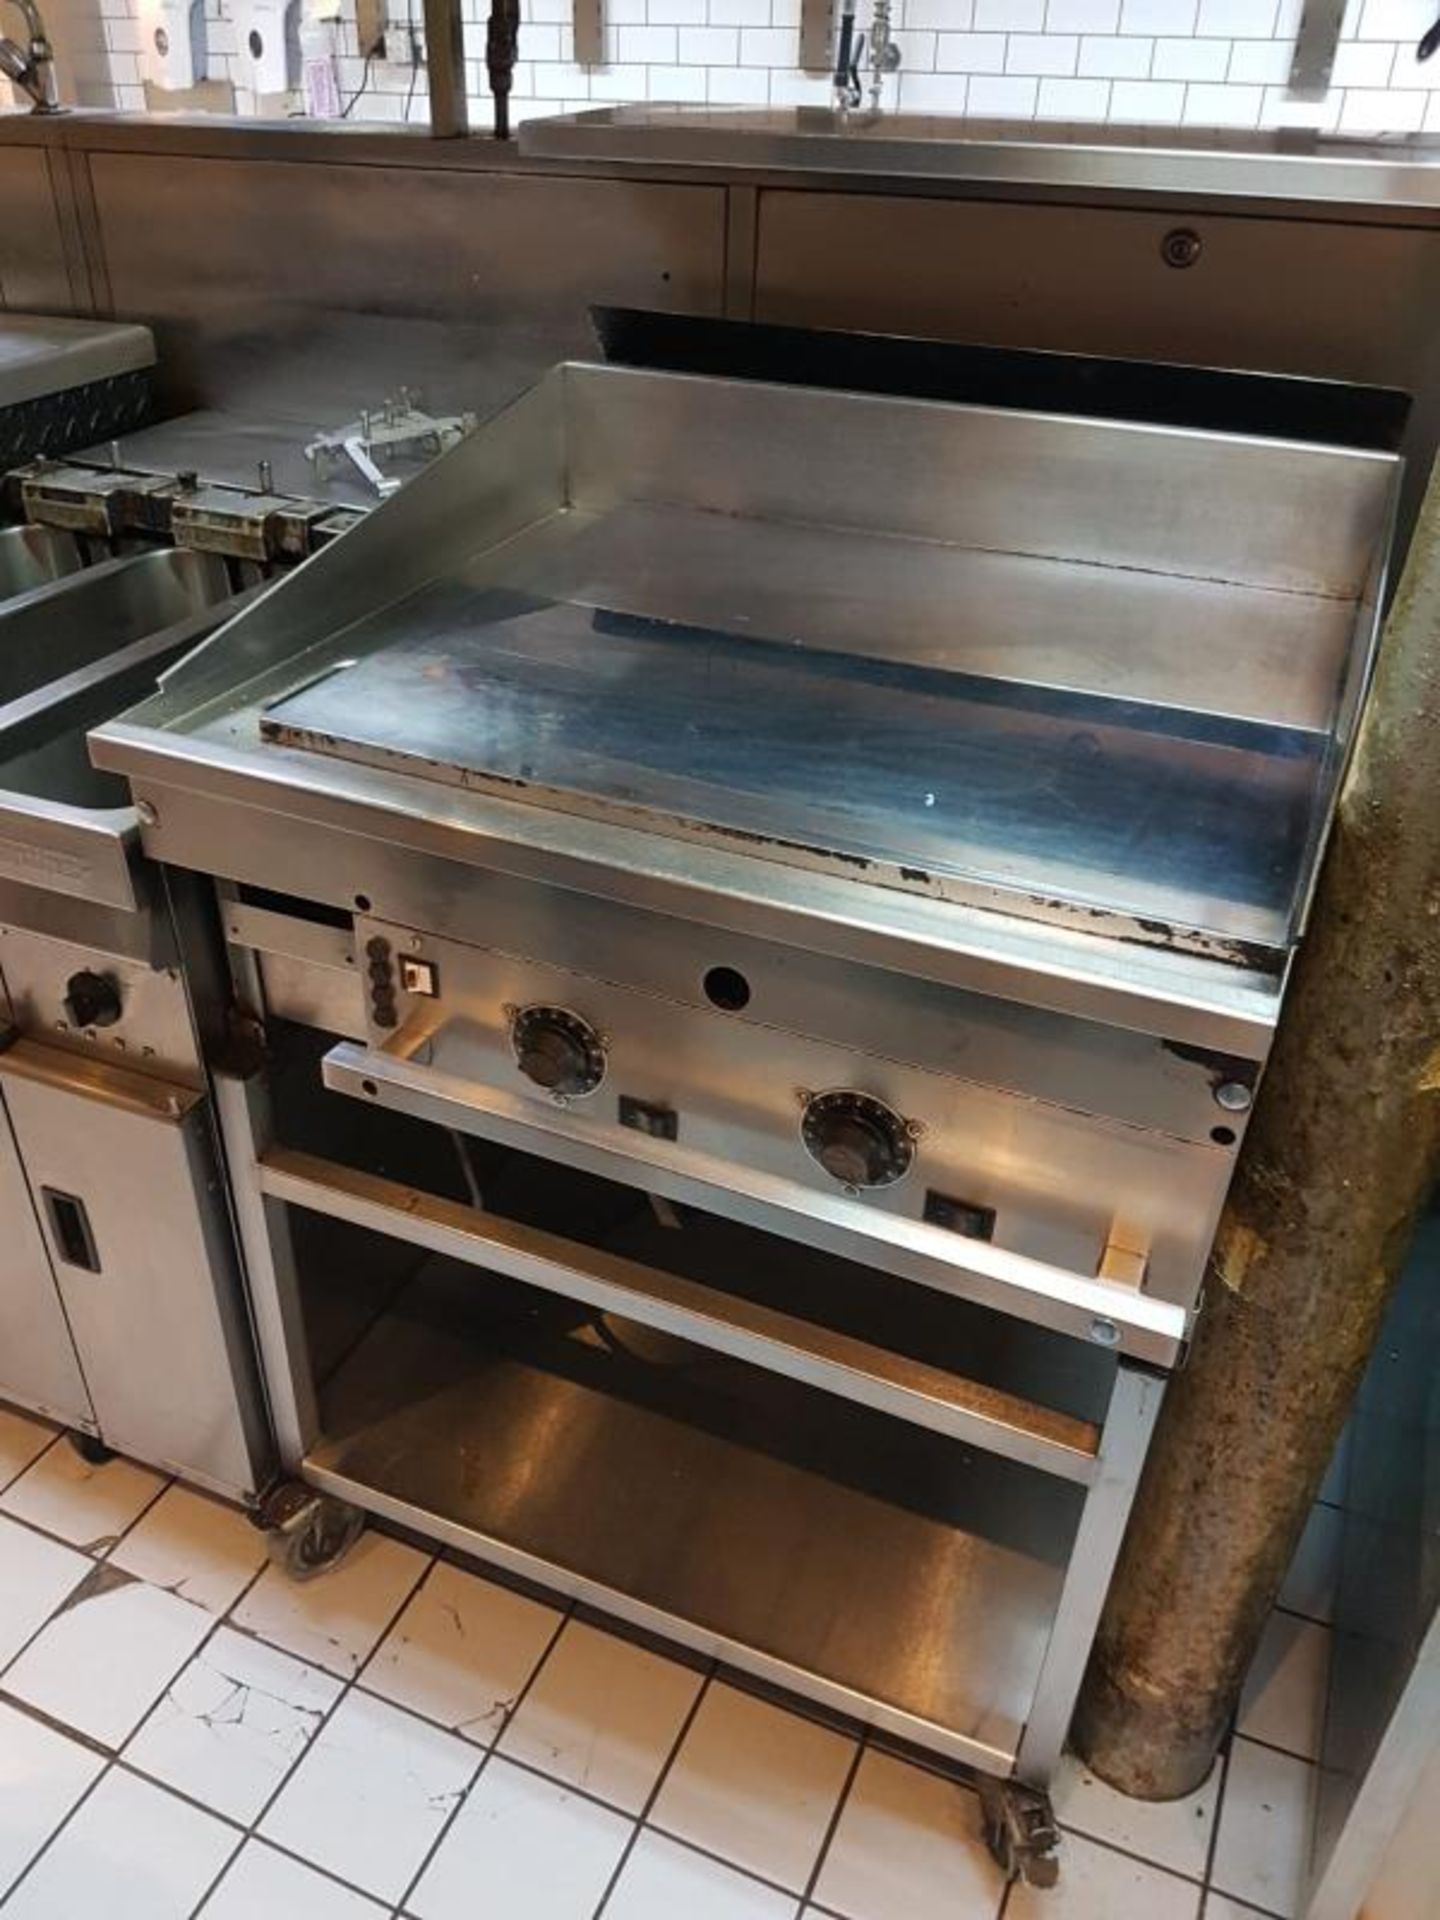 1 x Keating Heavy Duty Stainless Steel Natural Gas Griddle With Stand on Castors - CL332 - Location: - Image 2 of 4